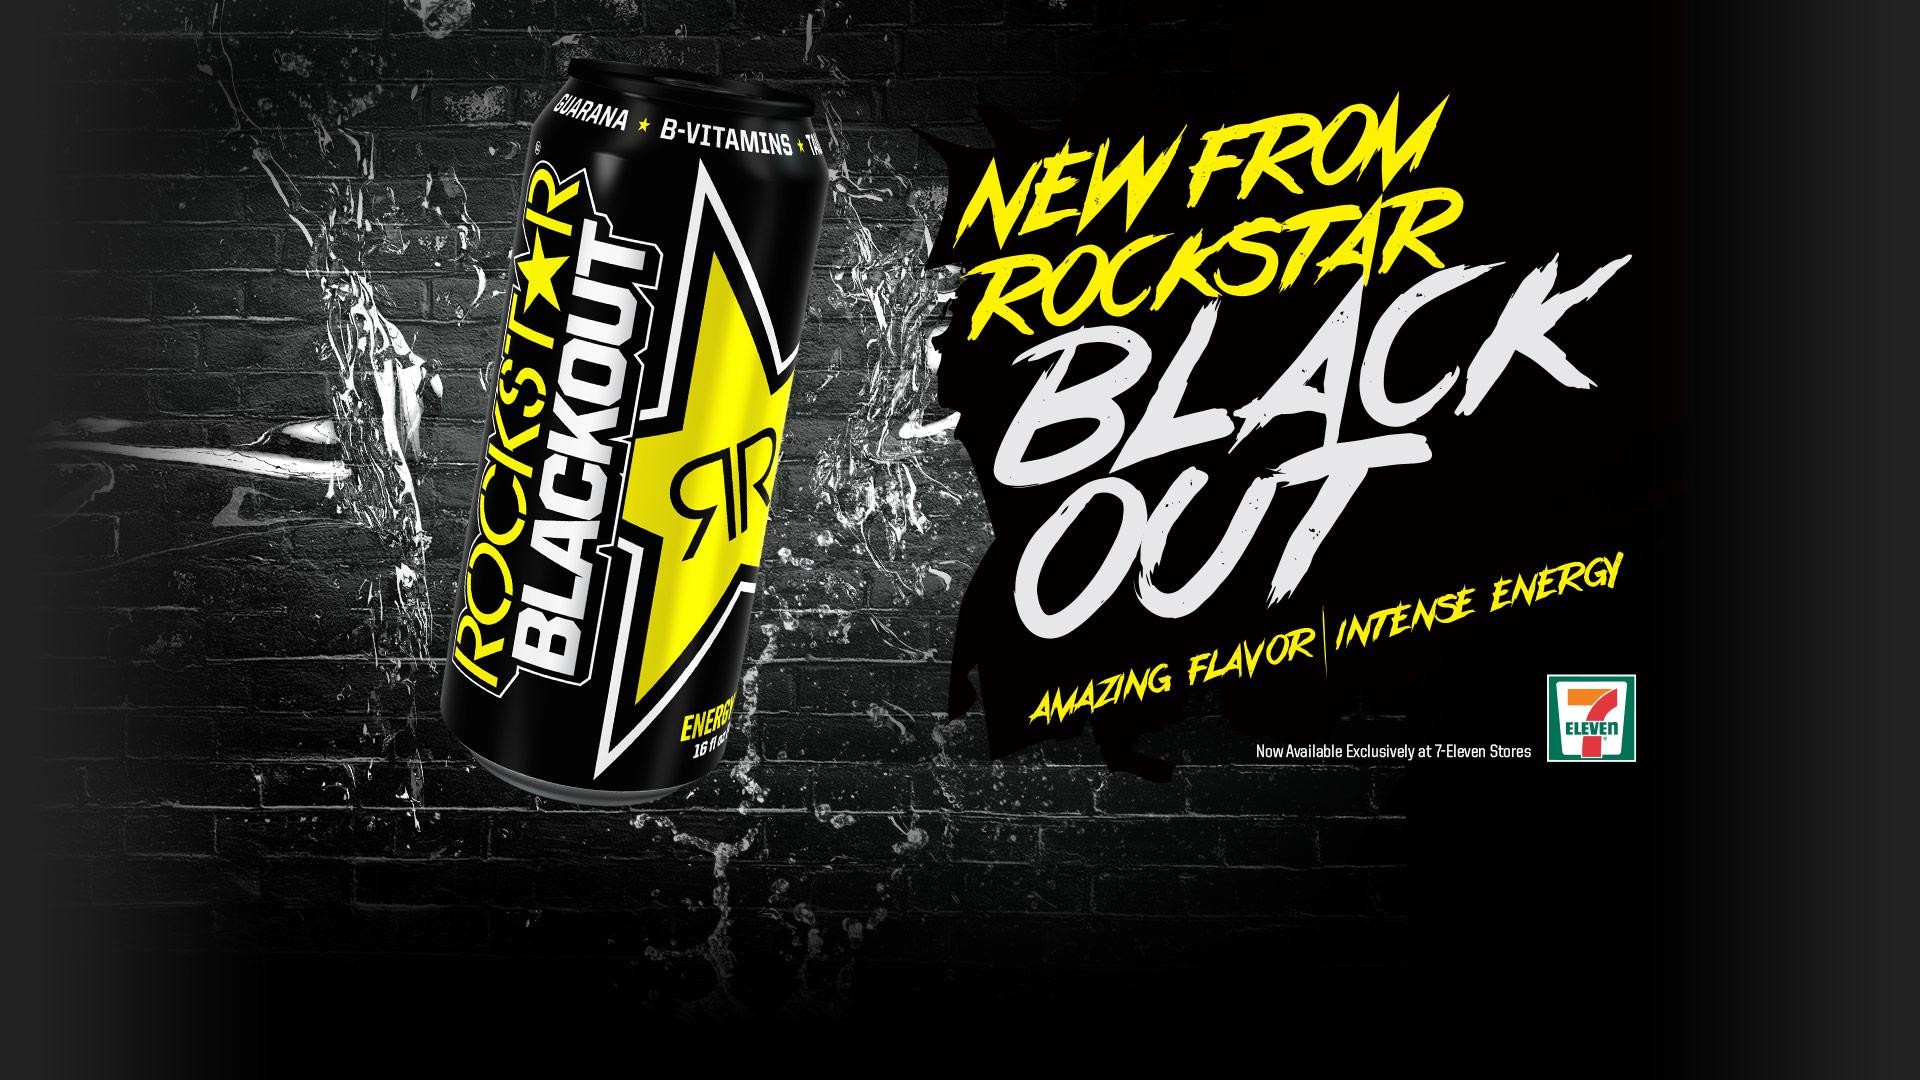 1920x1080 HD Quality Wallpaper | Collection: Products,  Rockstar Energy